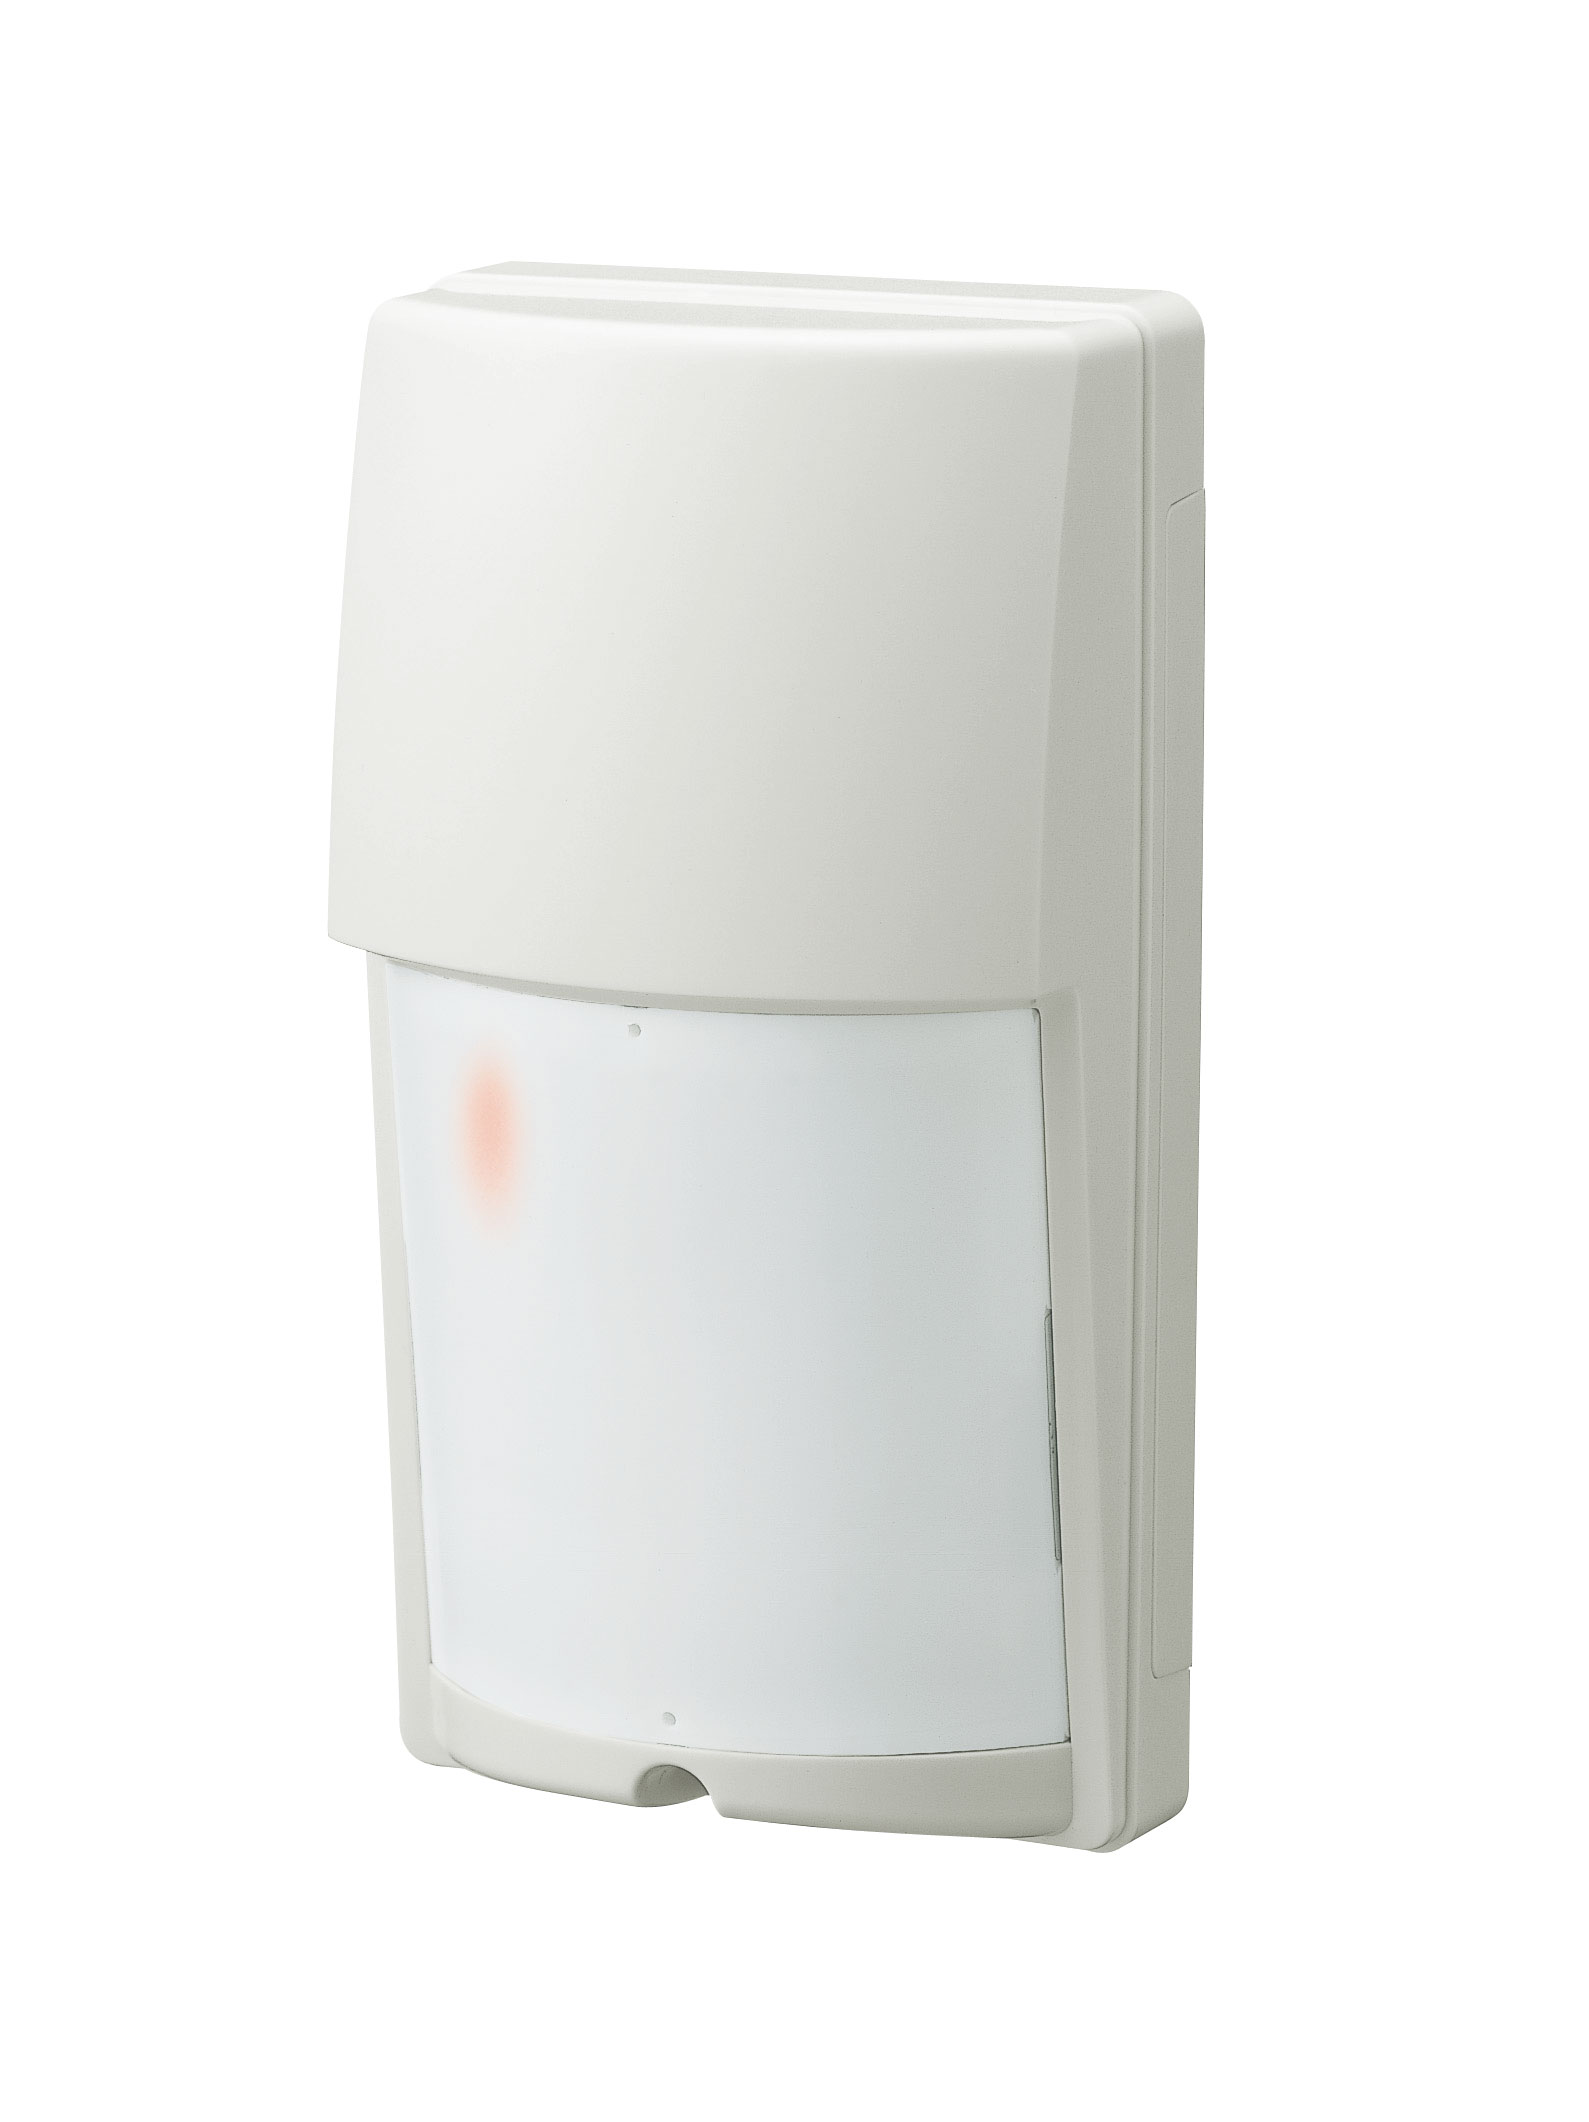 Optex LX-402 12M Wide Angle Outdoor Alarm Detector